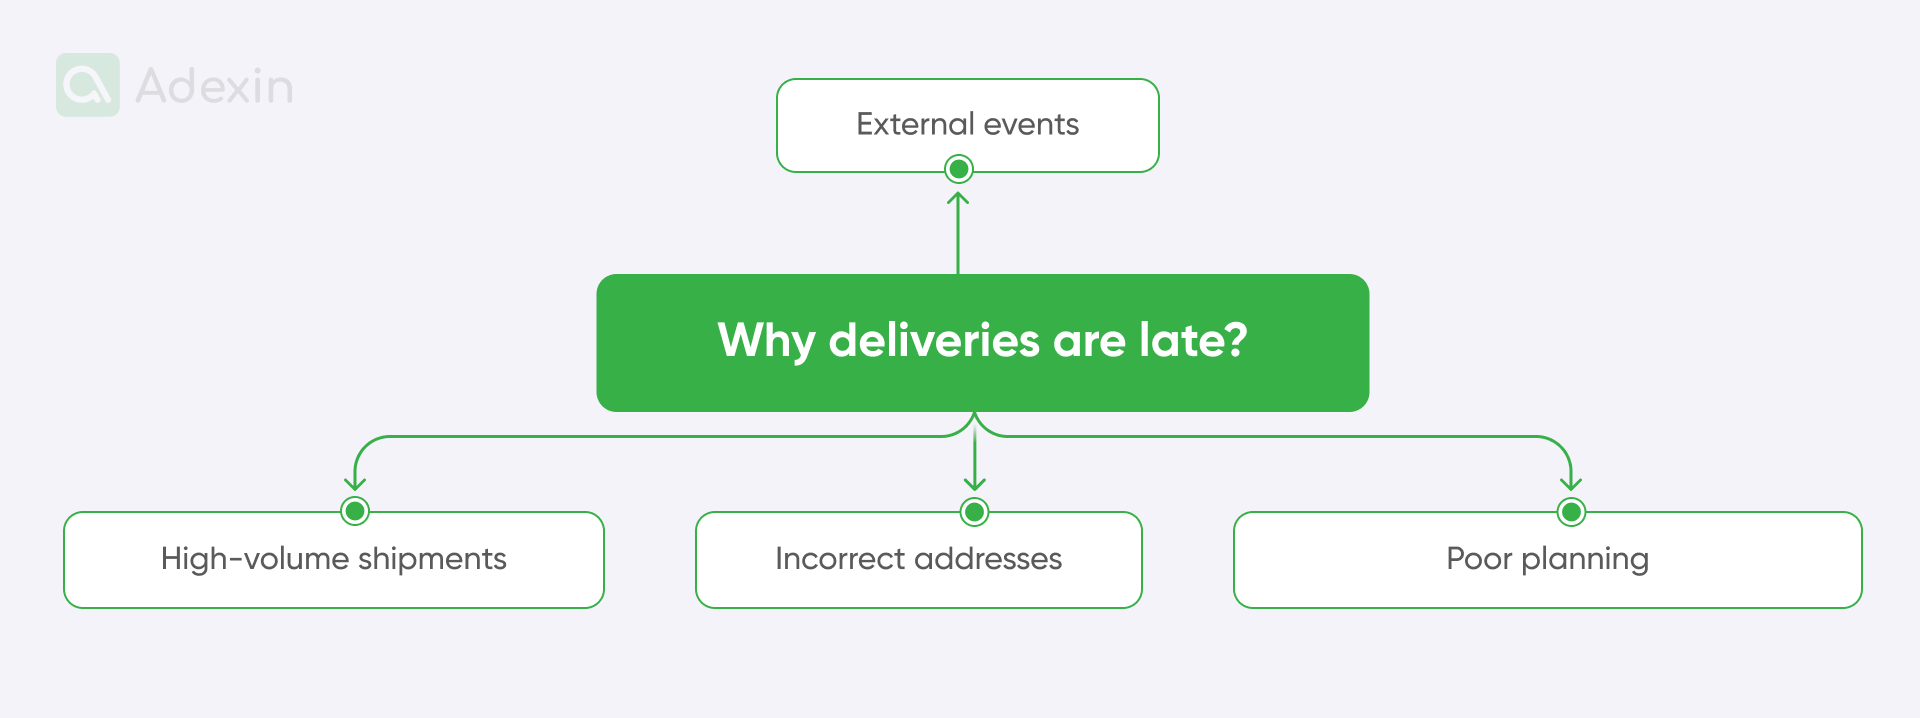 Main reasons why deliveries are late